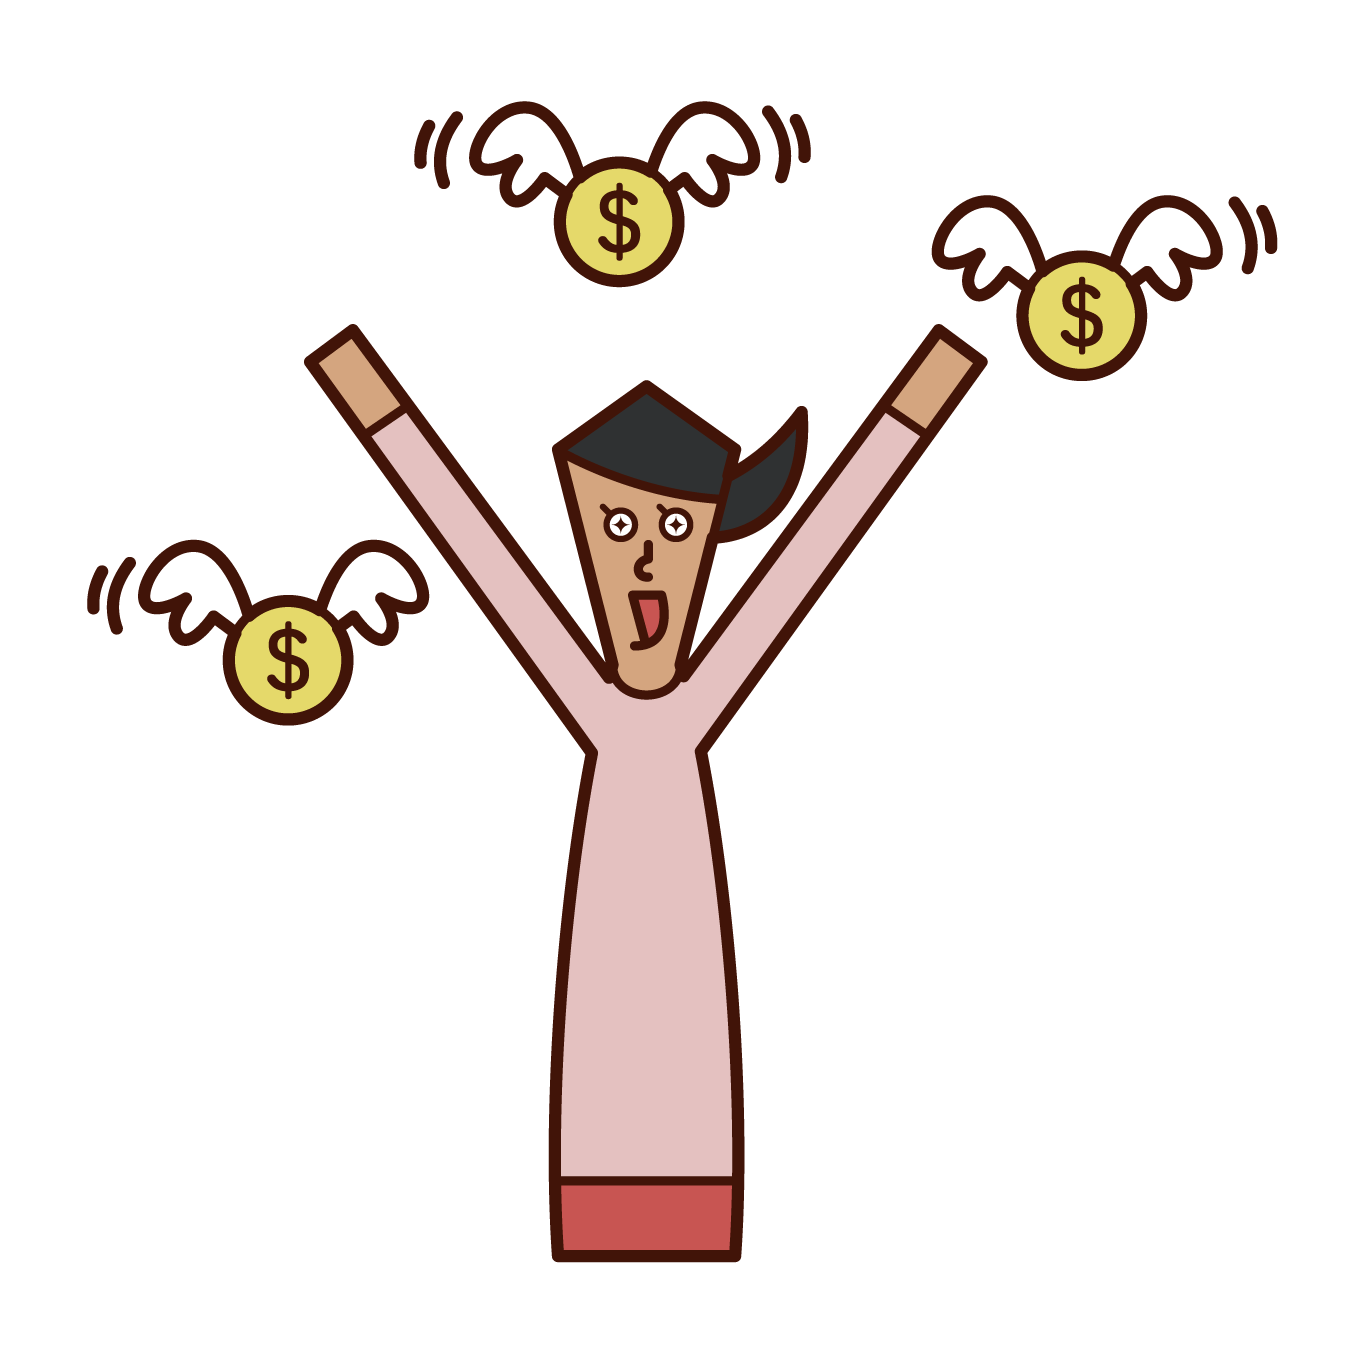 Illustration of a person (woman) who is pleased with earning a temporary income